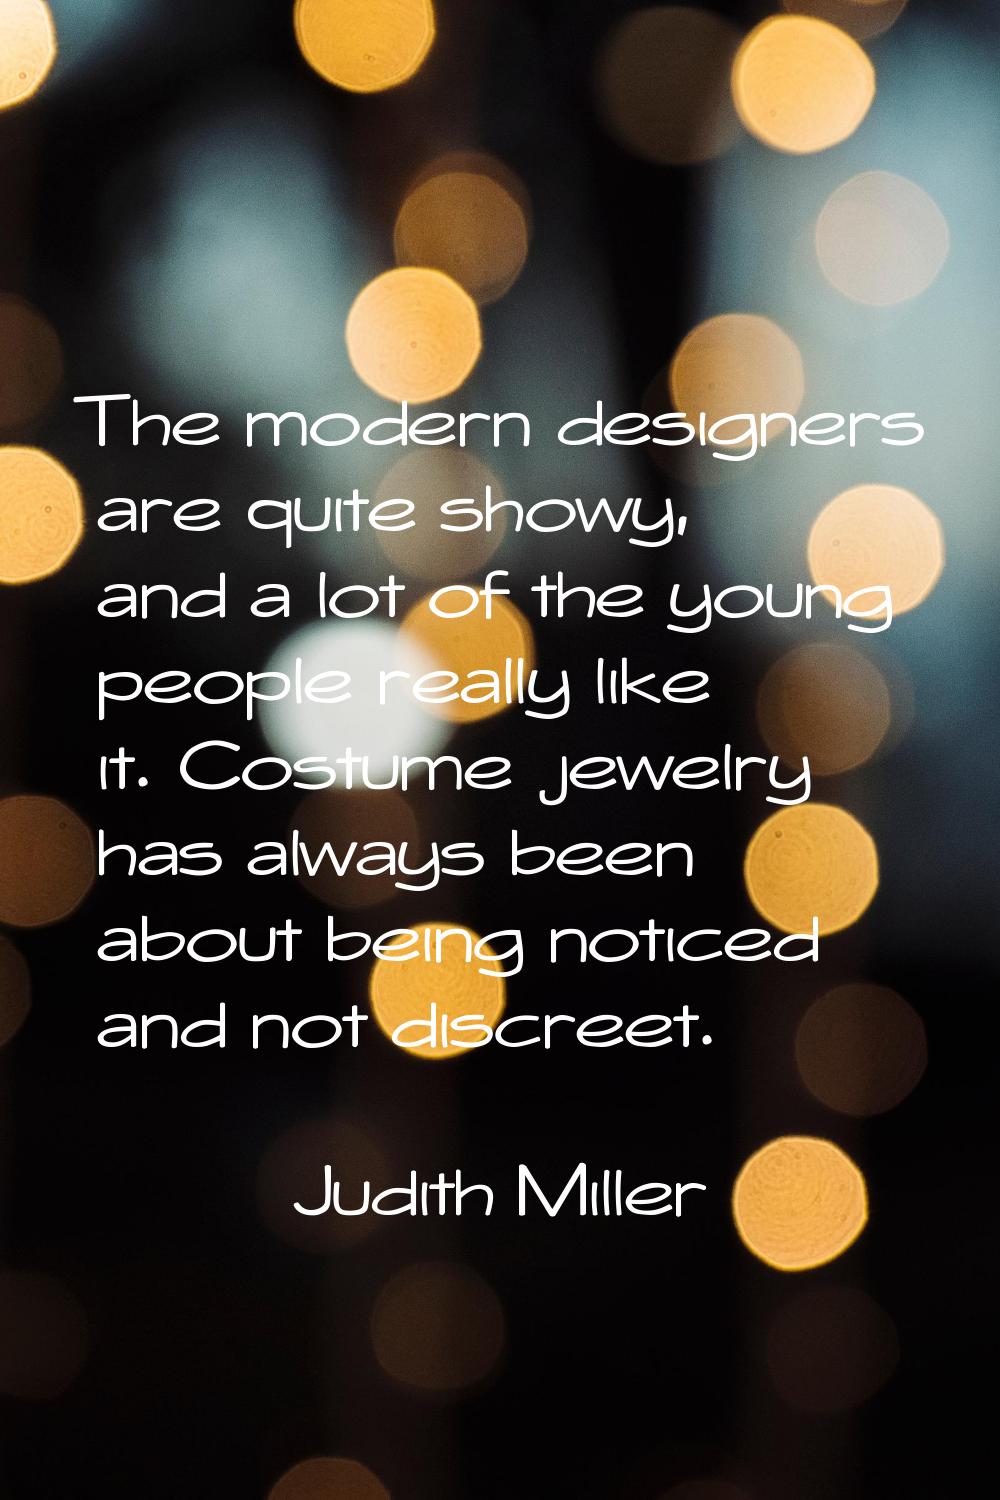 The modern designers are quite showy, and a lot of the young people really like it. Costume jewelry